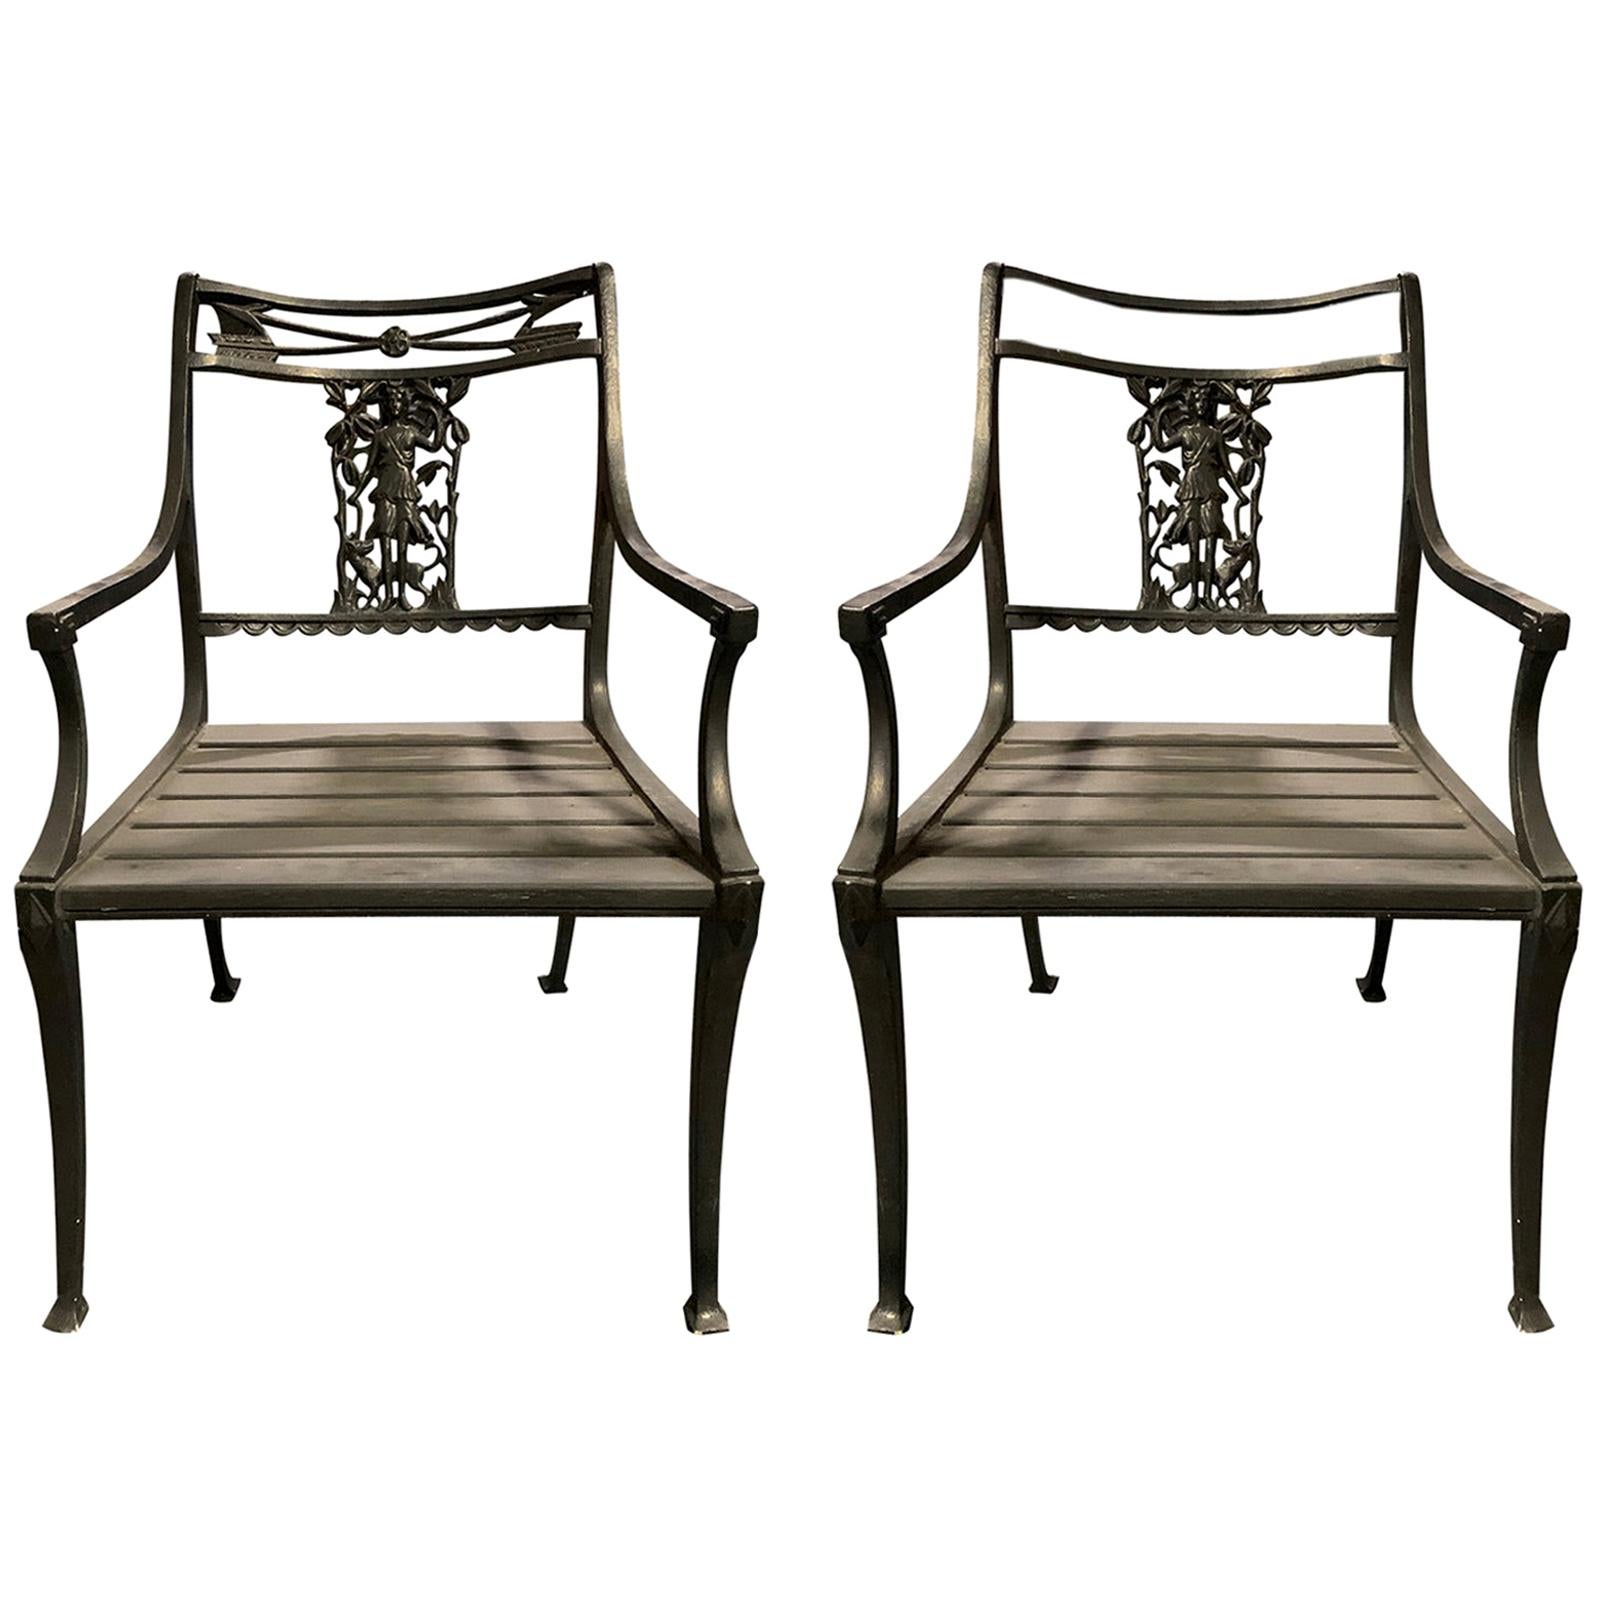 Pair of Wrought Iron Neoclassical "Diana the Huntress" Garden Chairs by Molla